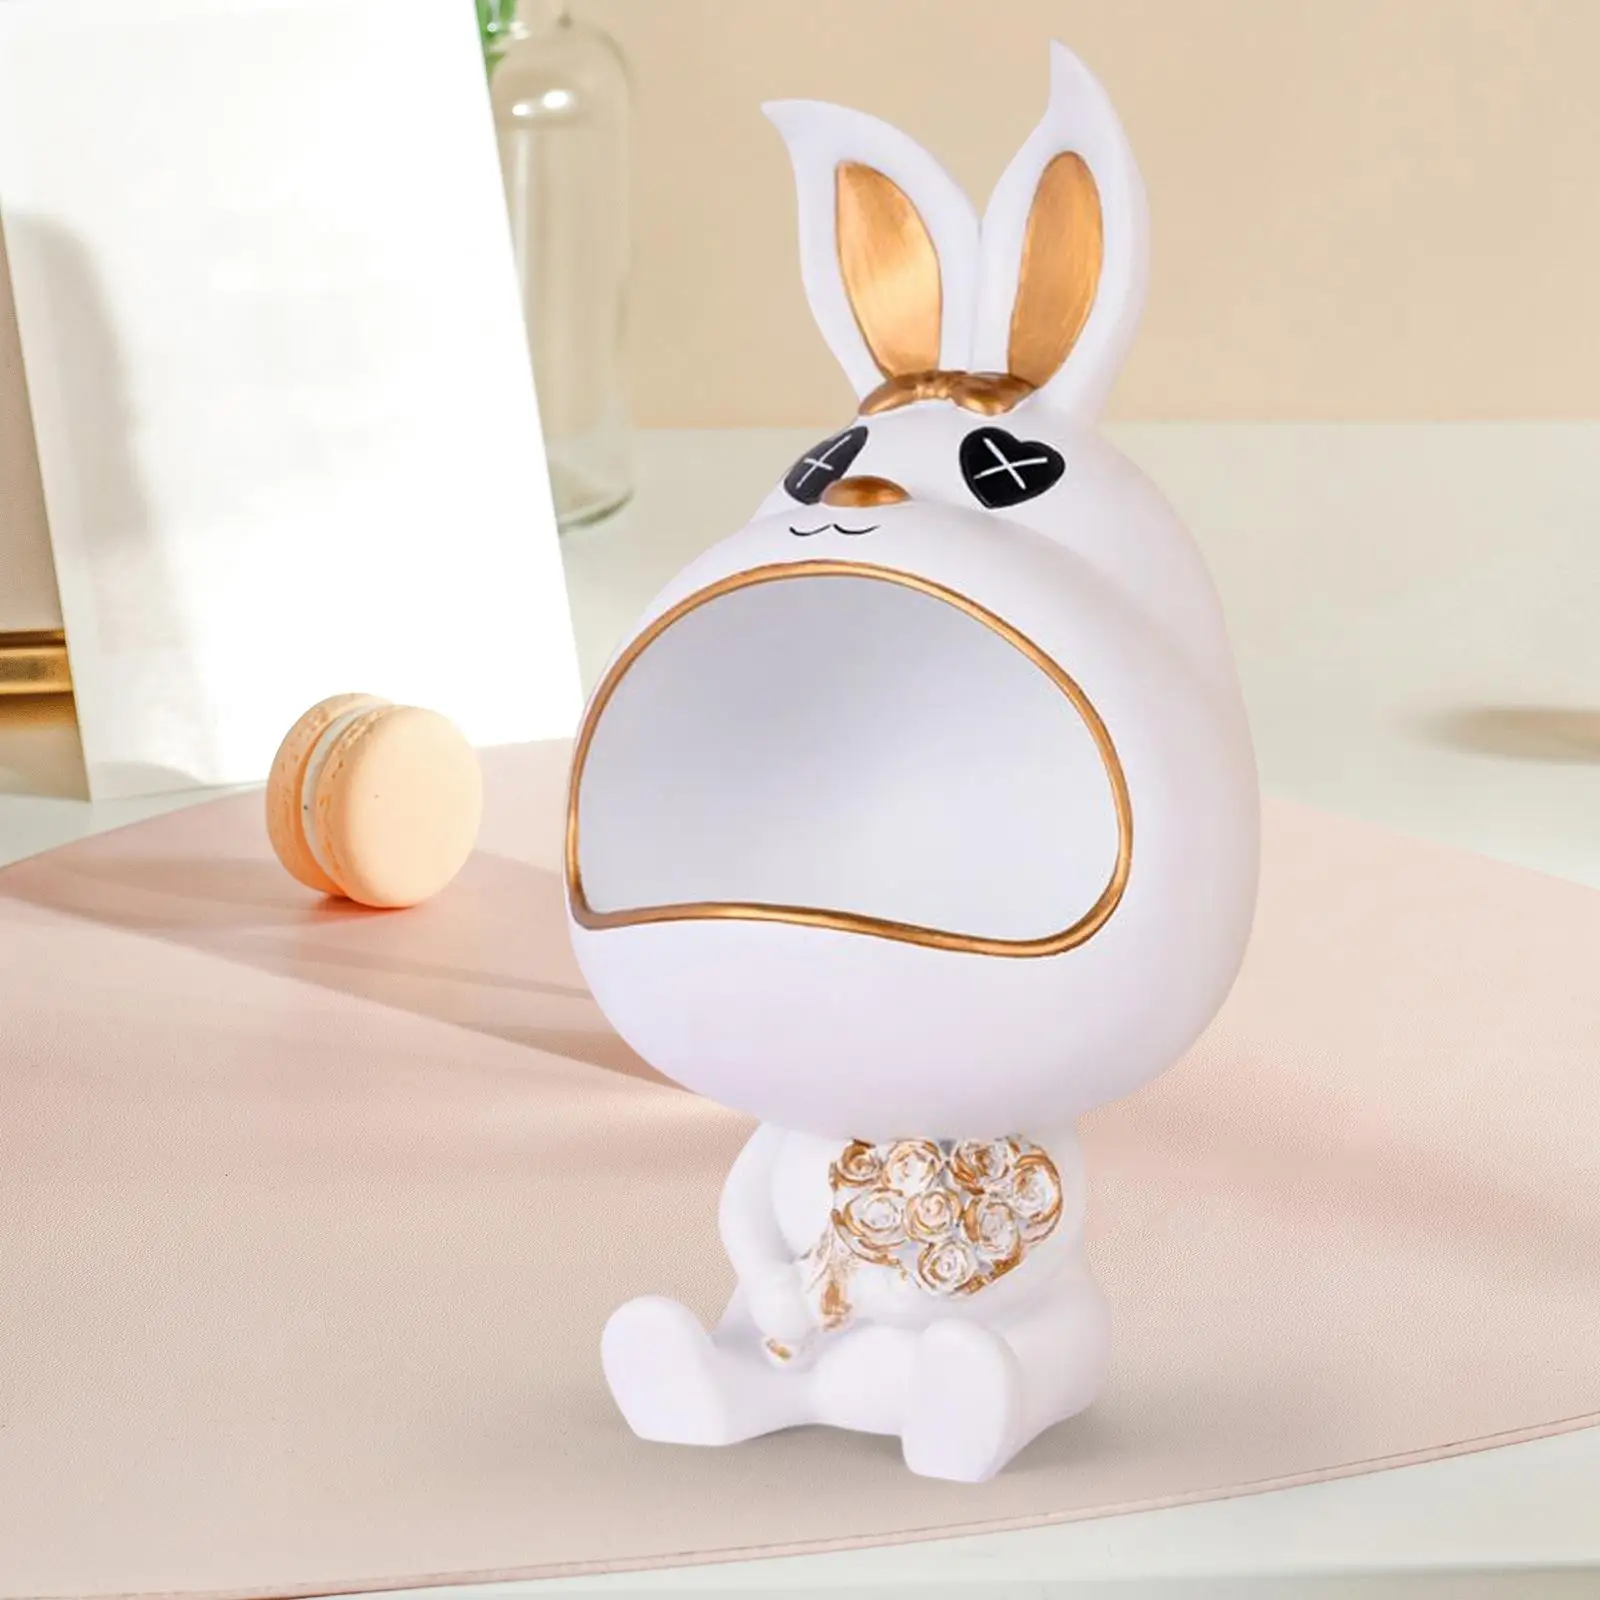 Rabbit Figurine Bunny Statue Resin Sculpture Crafts Organizer Keys Storage Box for Table Dining Room Entrance Holiday Home Decor